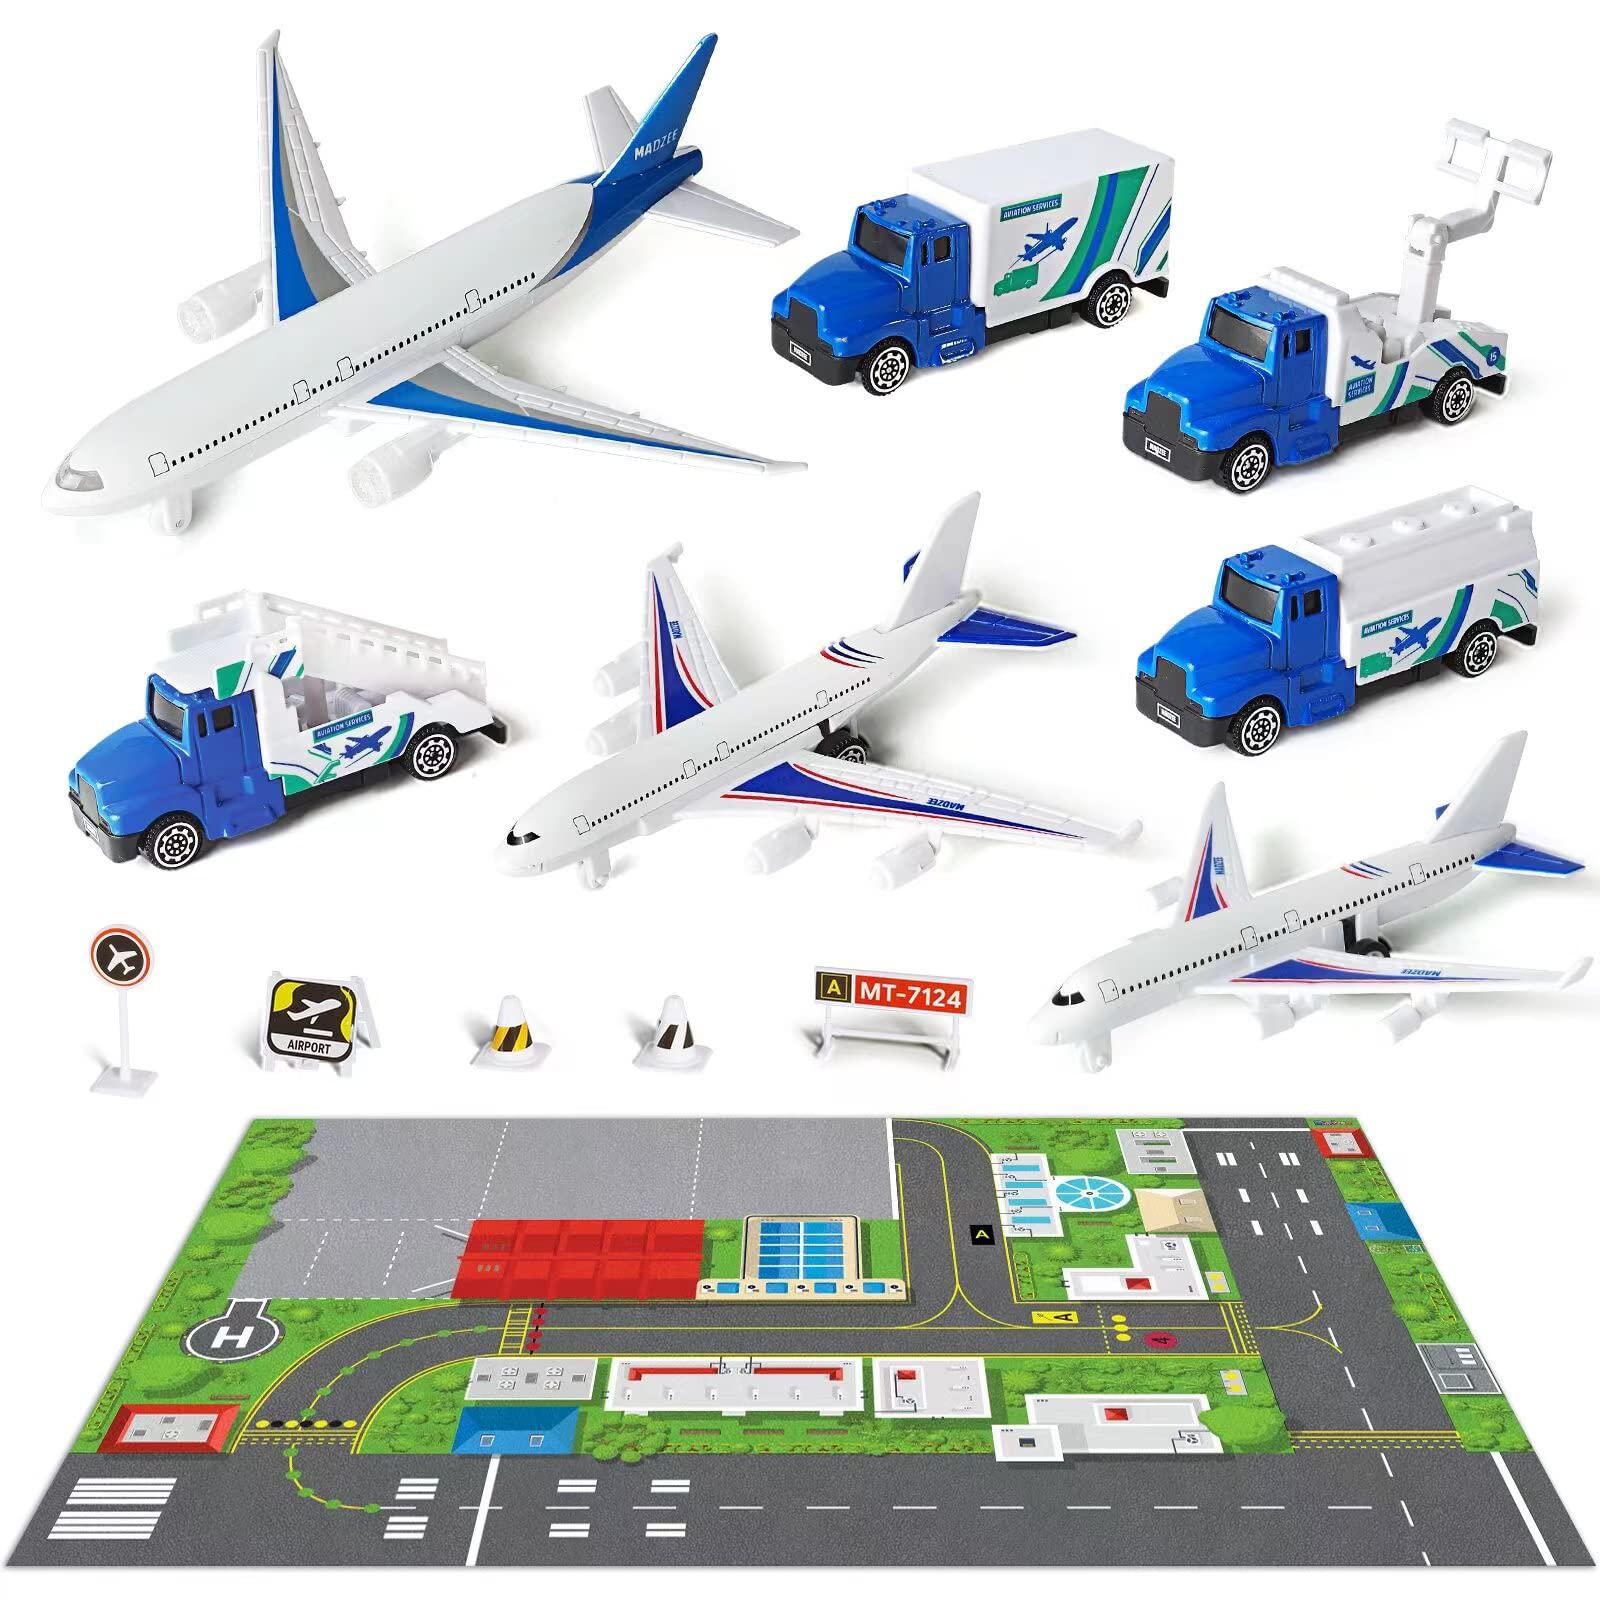 Madzee airplane toy set and kids activity play mat with planes, trucks, signs, and large playmat airport, interactive early learning